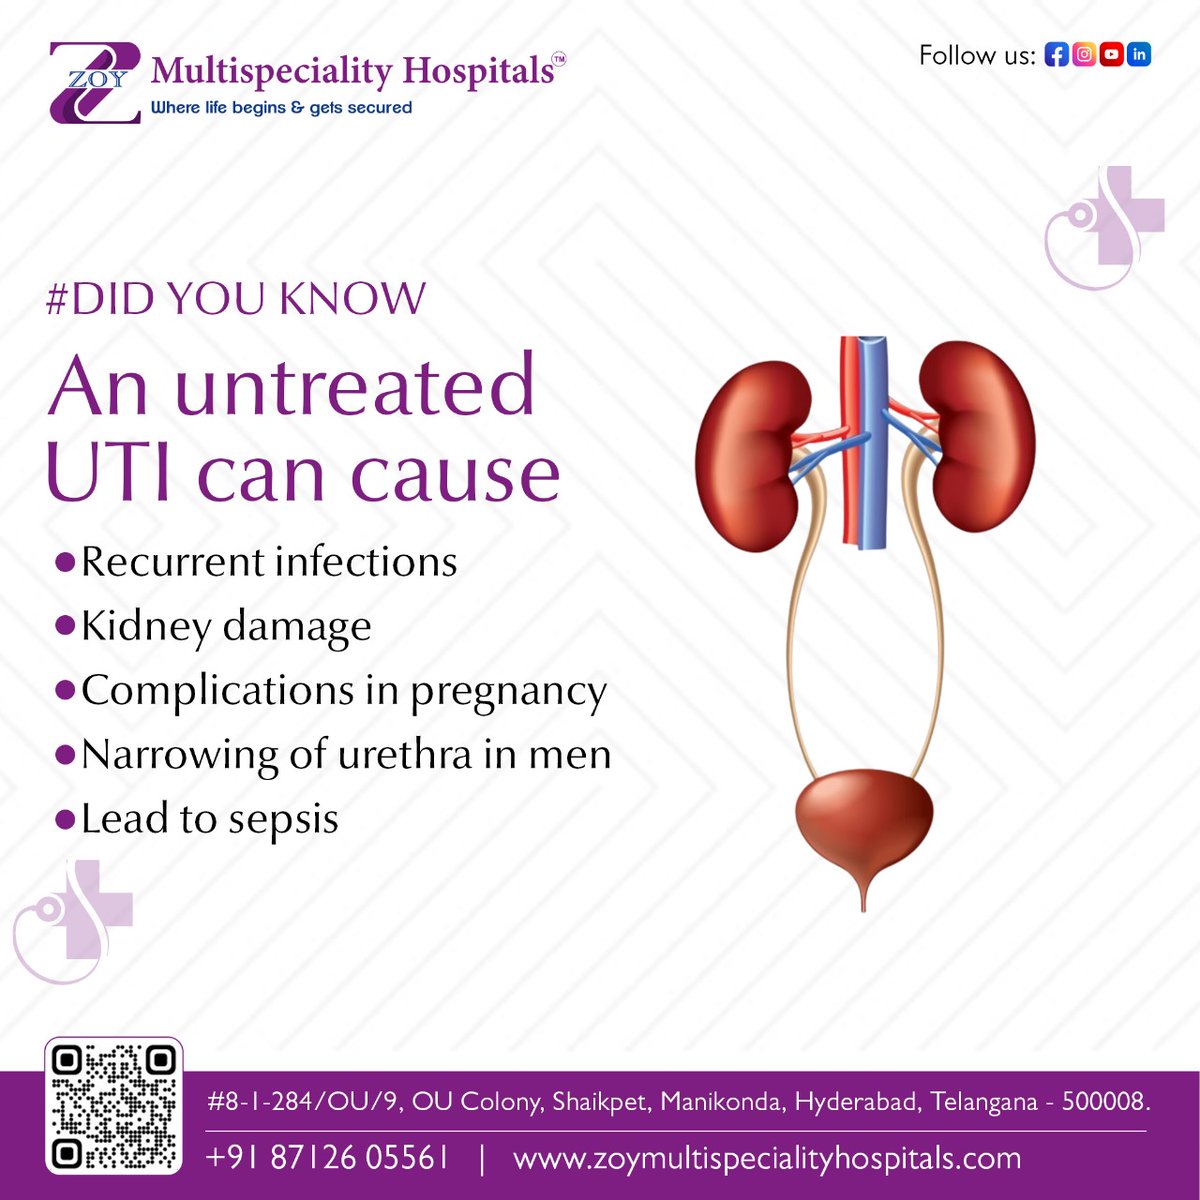 🔍 #DIDYOUKNOW neglecting a UTI can lead to serious health issues? 🚫 Don't risk it! Seek timely treatment at Zoy Multispeciality Hospital to avoid recurrent infections, kidney damage, and more. 🏥💊

#ZoyLove #UTIAwareness #HealthFacts #PreventInfections #kidneyhealth